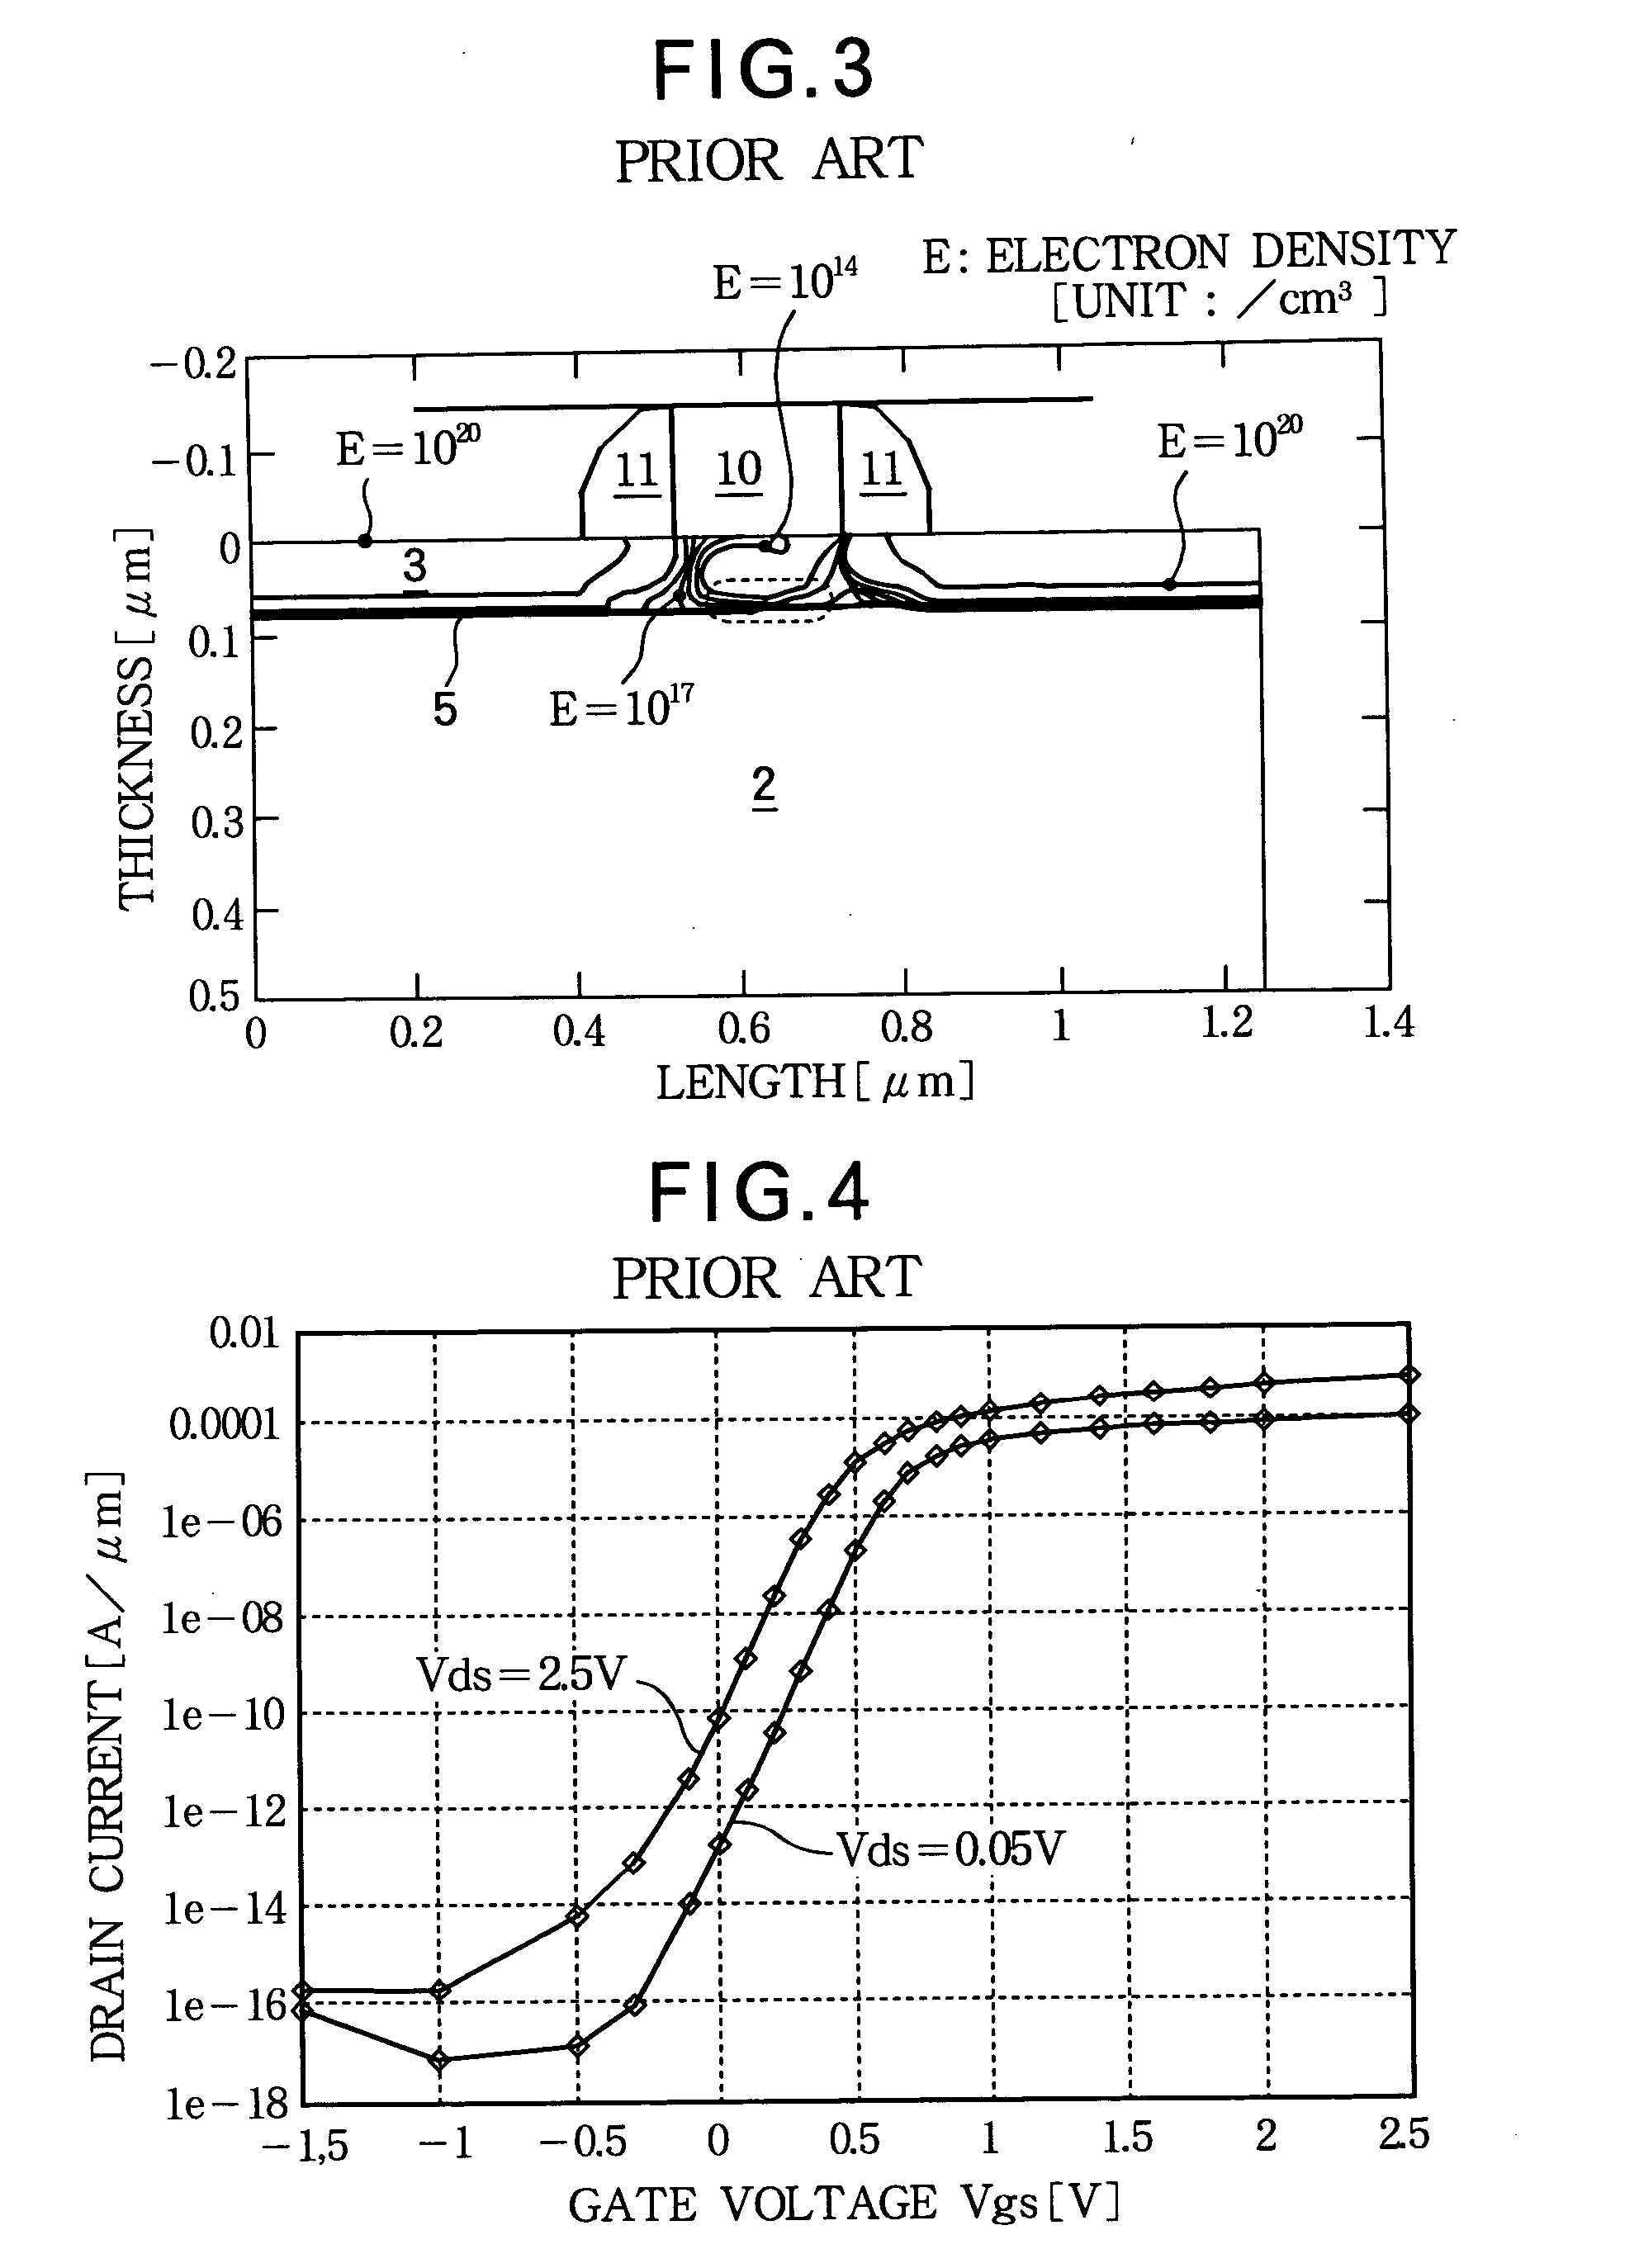 Silicon-on-sapphire semiconductor device with shallow lightly-doped drain